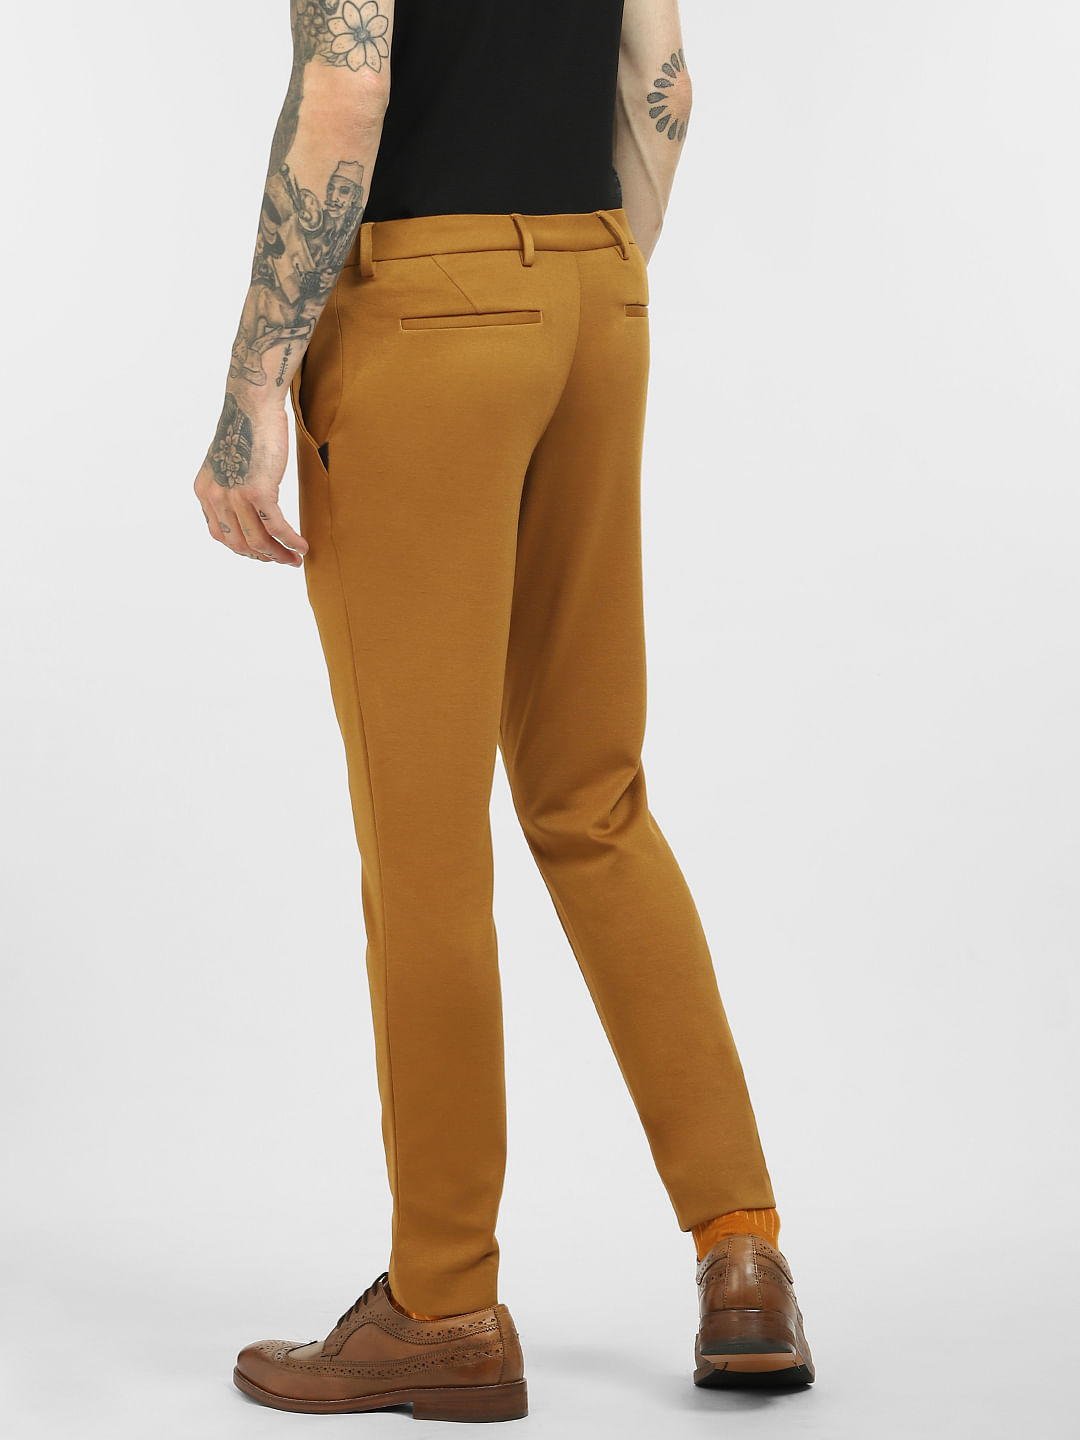 Buy Brown Trousers  Pants for Women by Marks  Spencer Online  Ajiocom